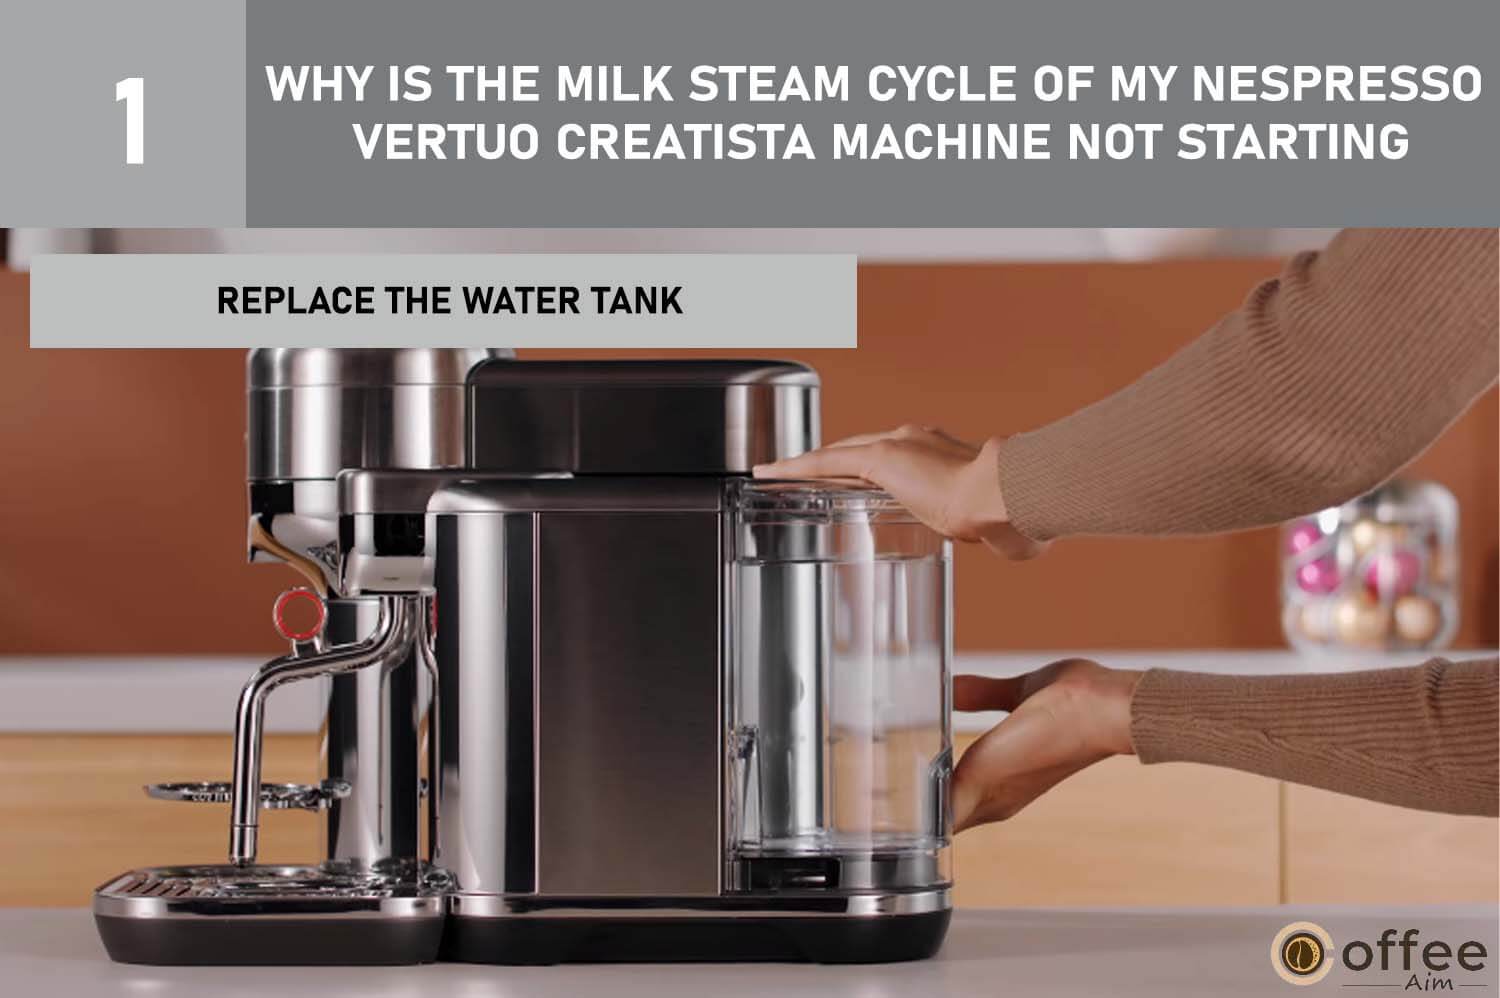 Image shows steps to replace water tank in Nespresso Vertuo Creatista. Follow for milk steam cycle issue. Article details fixes.